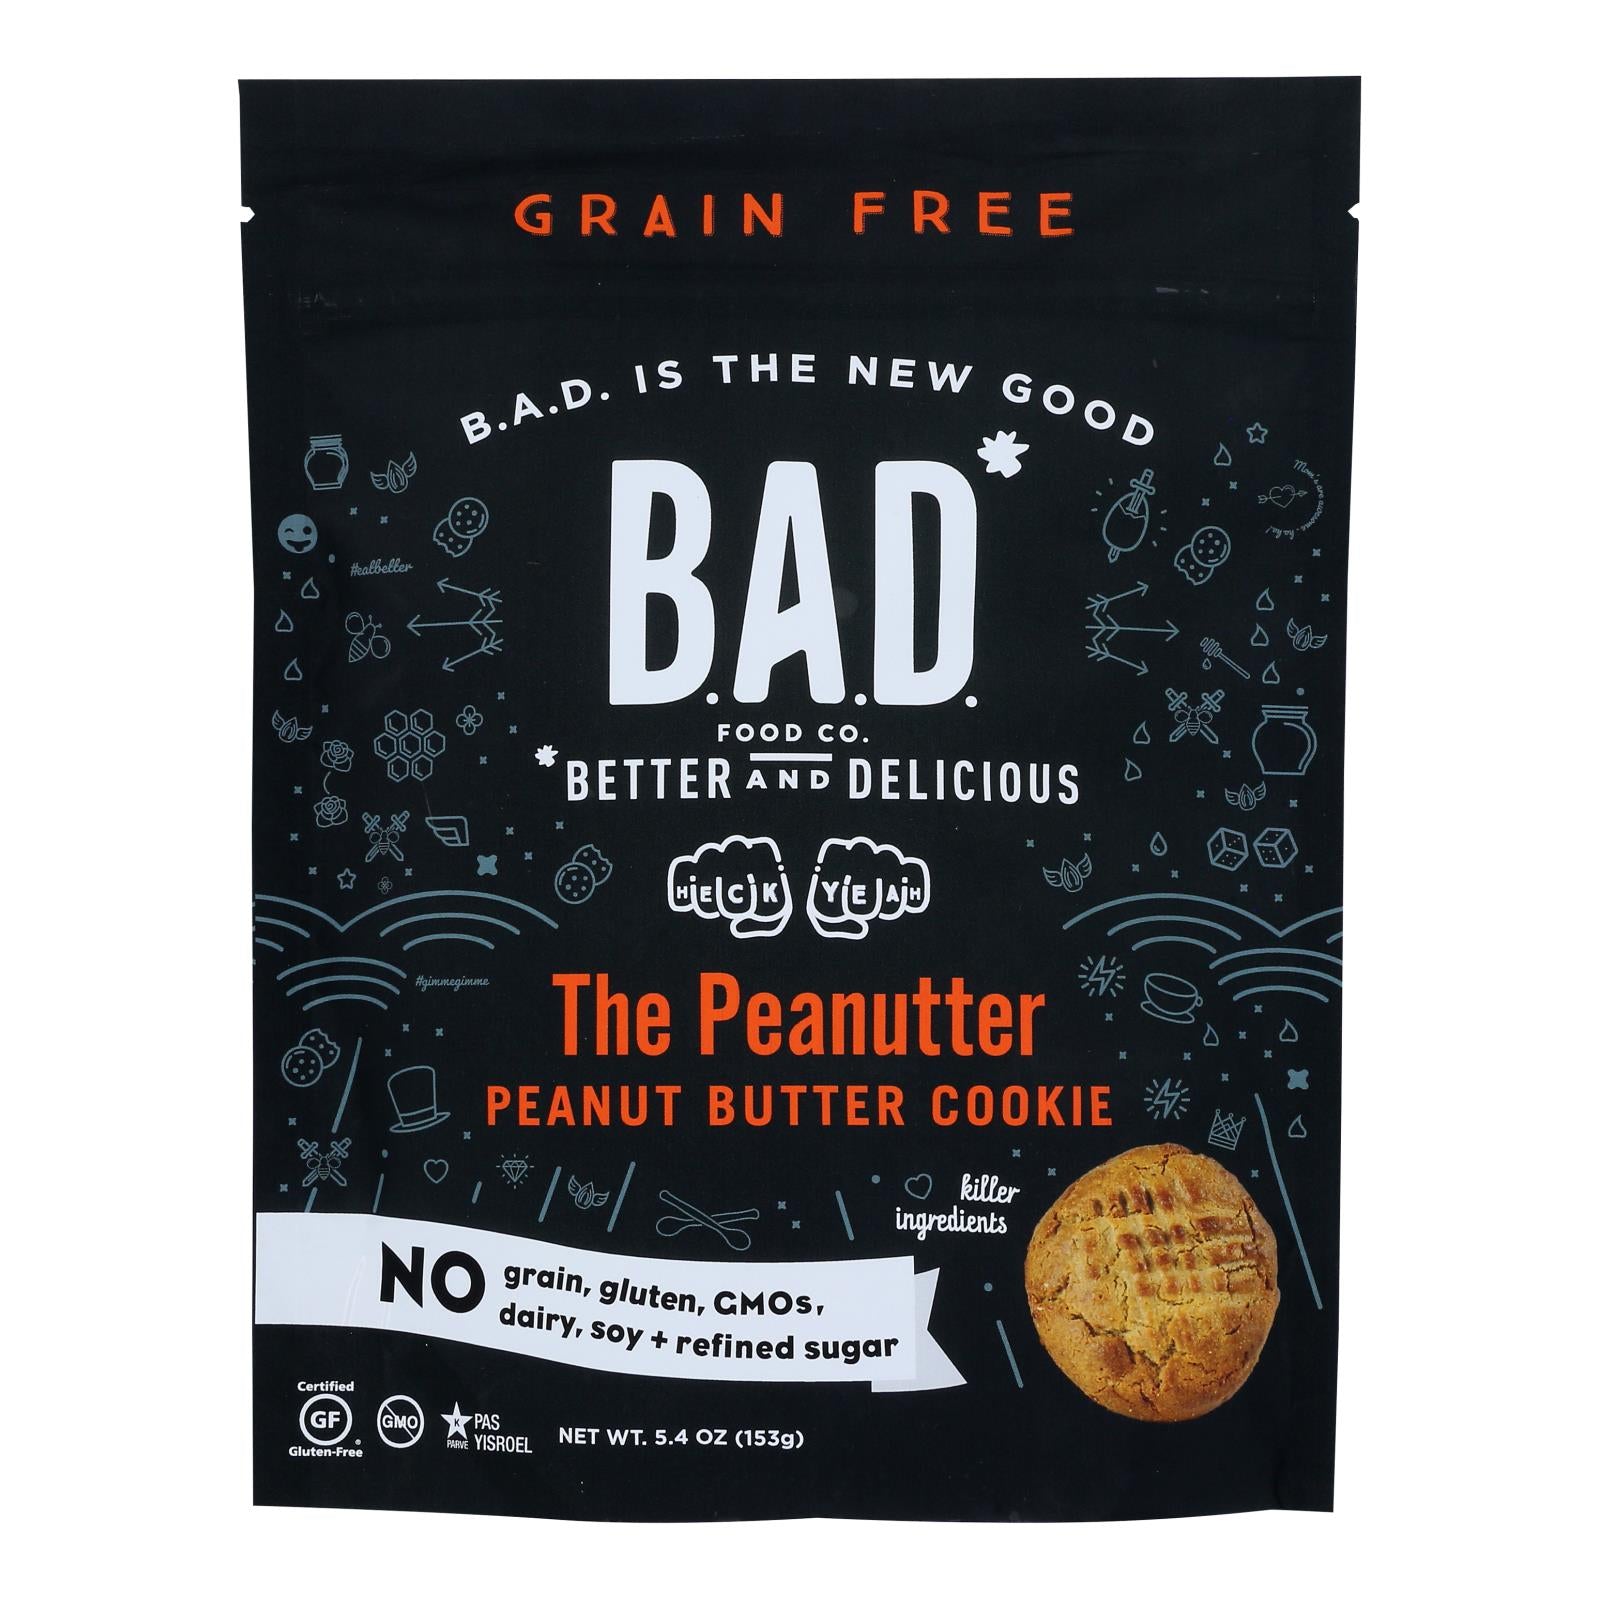 B.A.D. FOOD CO., B.a.d. Food Co. - Cookies Peanut Butter - Case of 6-5.4 OZ (Pack of 6)